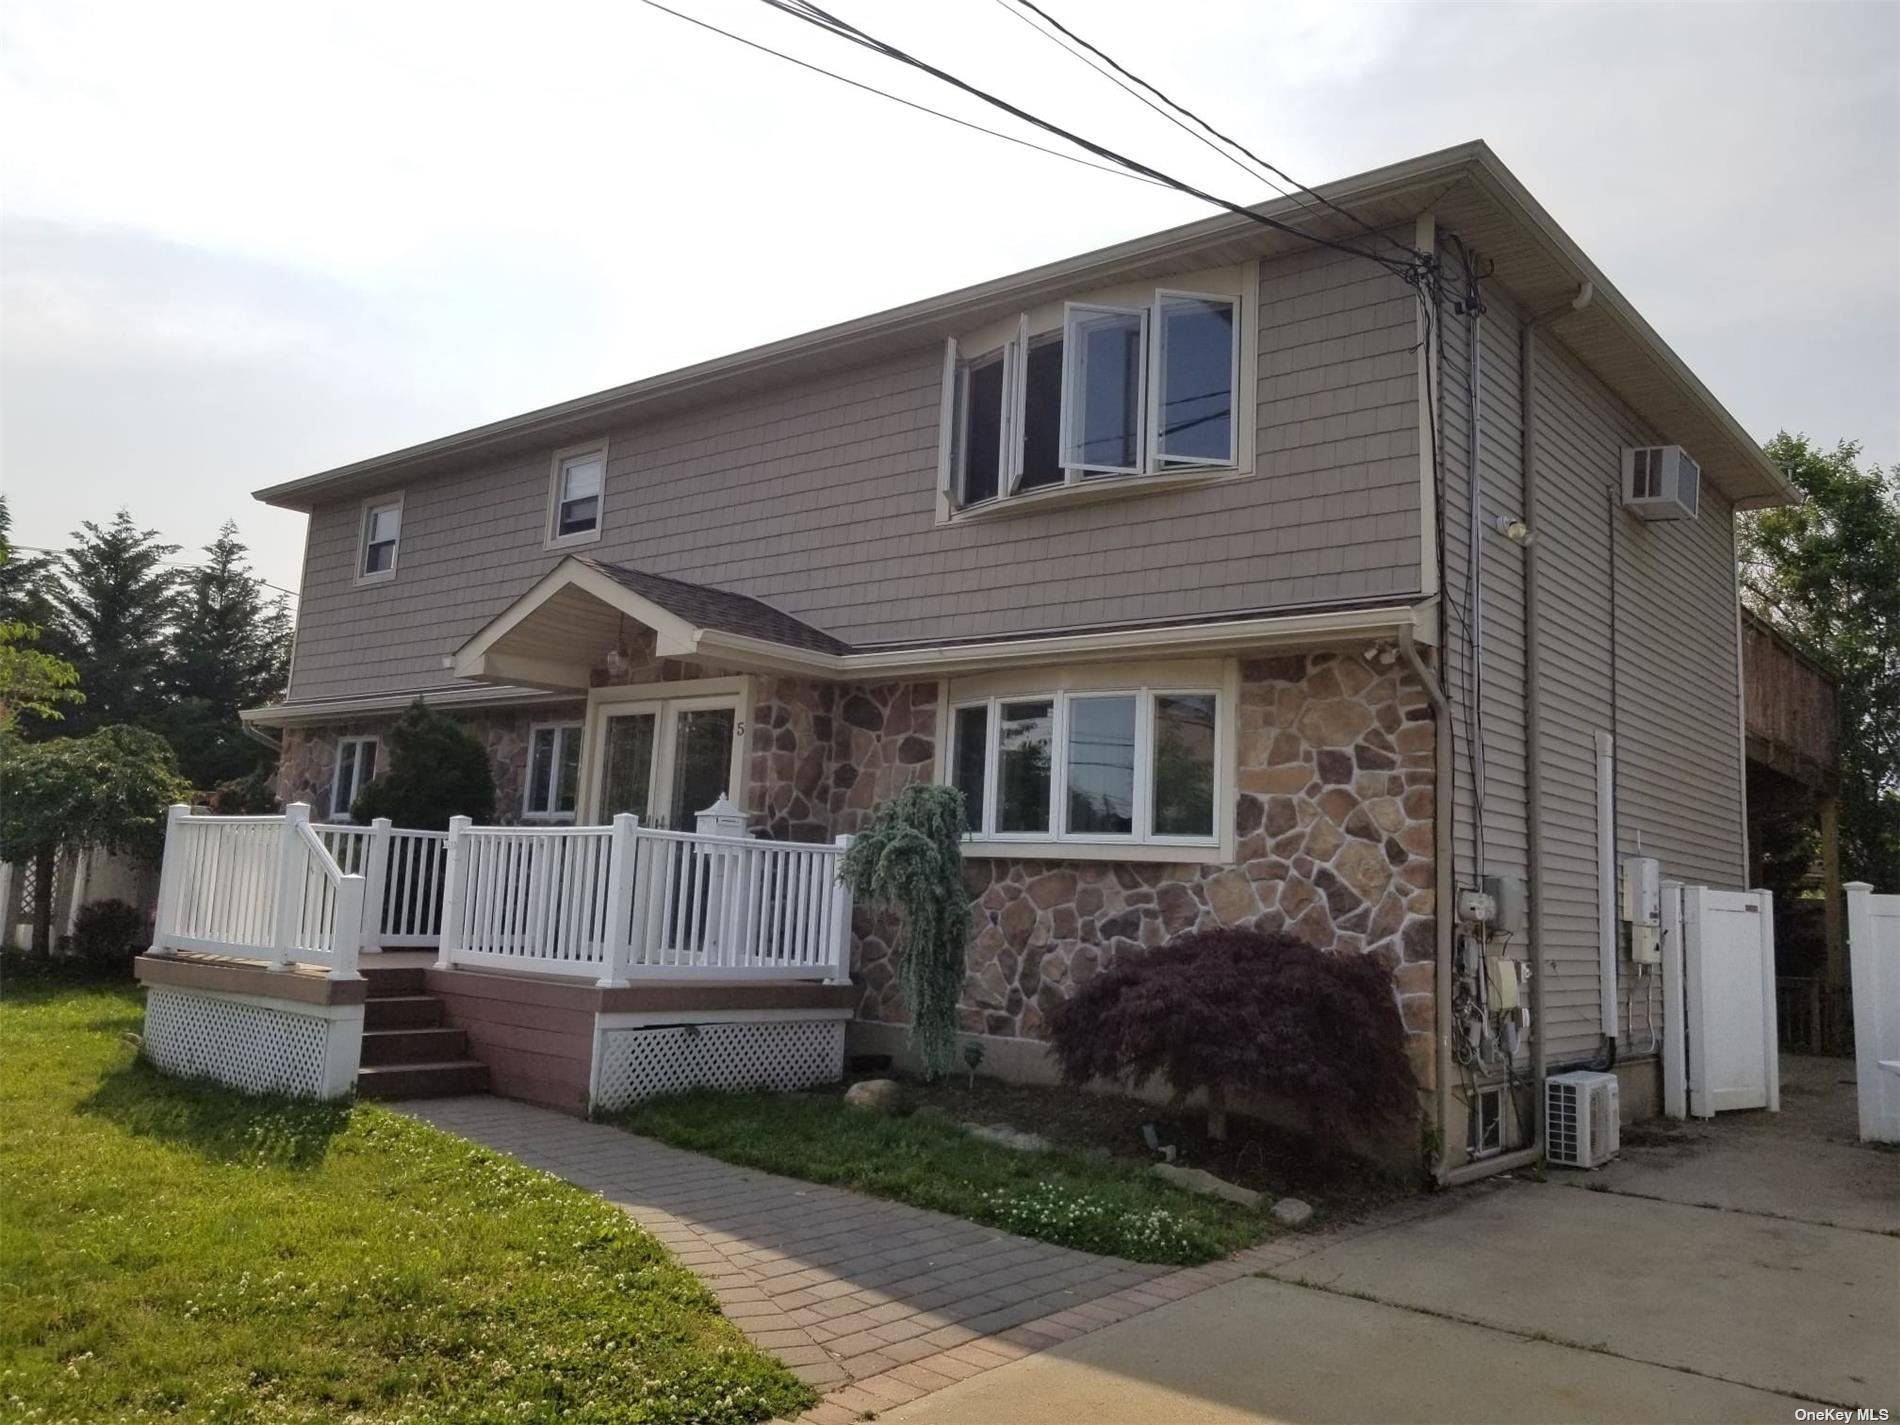 Available again ! ! Welcome to this 2nd floor apartment featuring Three nice sized bedrooms, a Living Room, a Dining Area, and a Kitchen with an outside deck.